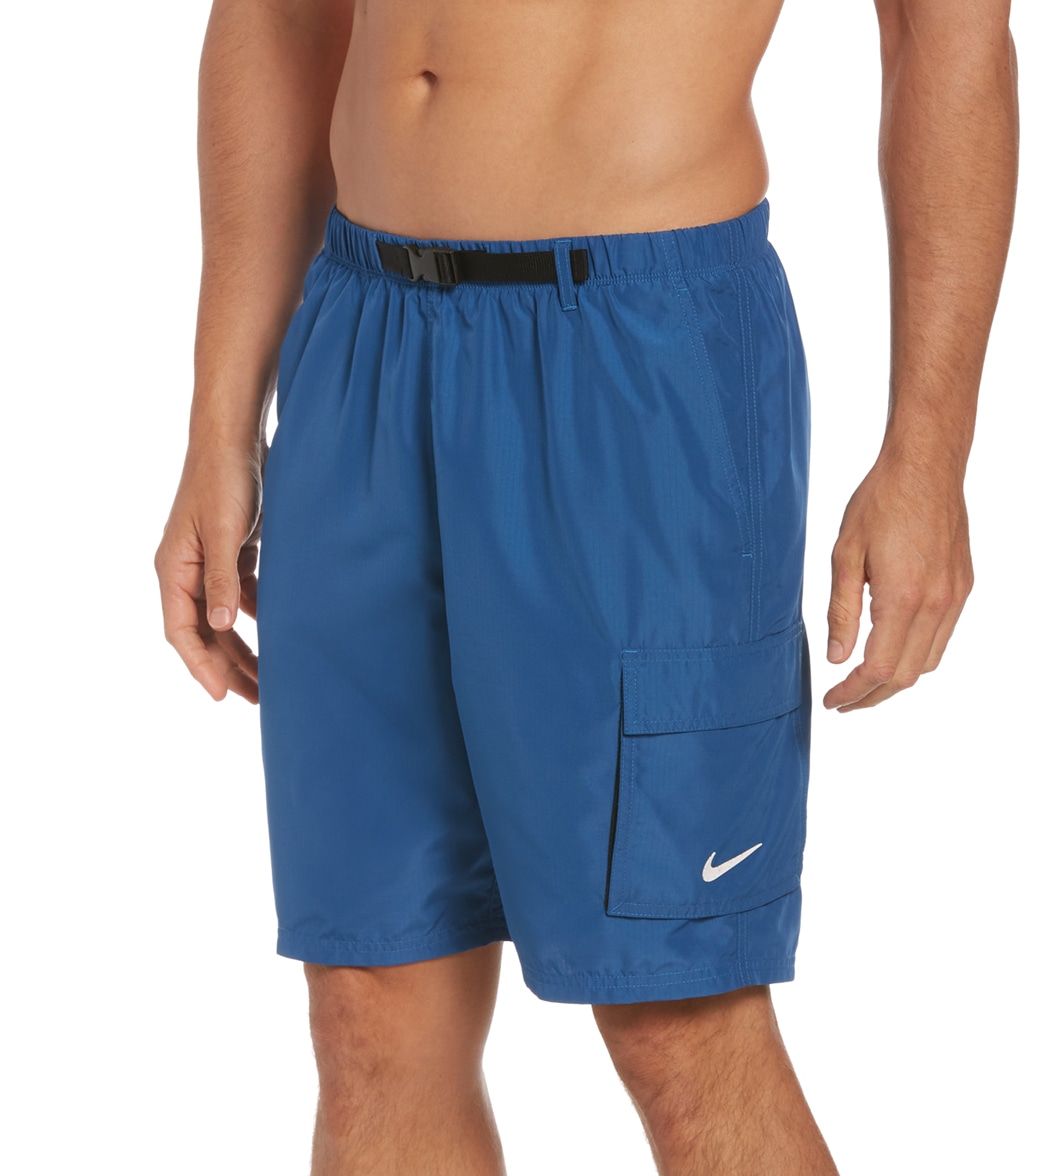 Nike Men's 20 Belted Packable Volley Short - Dark Marina Blue Small - Swimoutlet.com